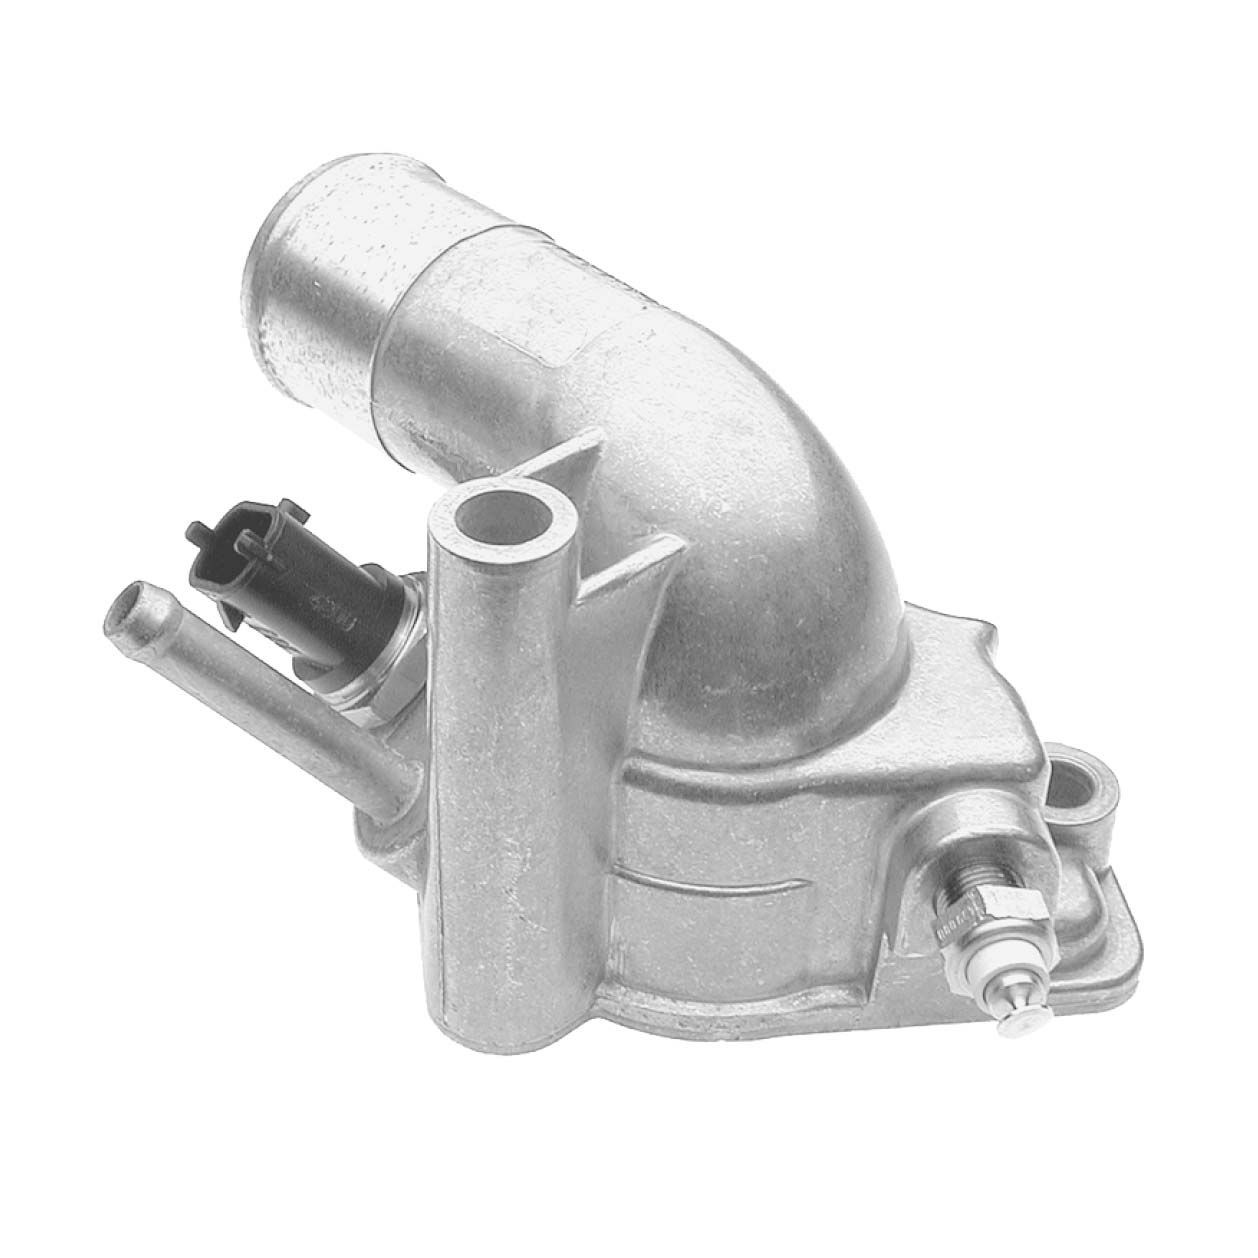 GATES TH22592G1 Engine thermostat Opening Temperature: 92°C, with gaskets/seals, with housing